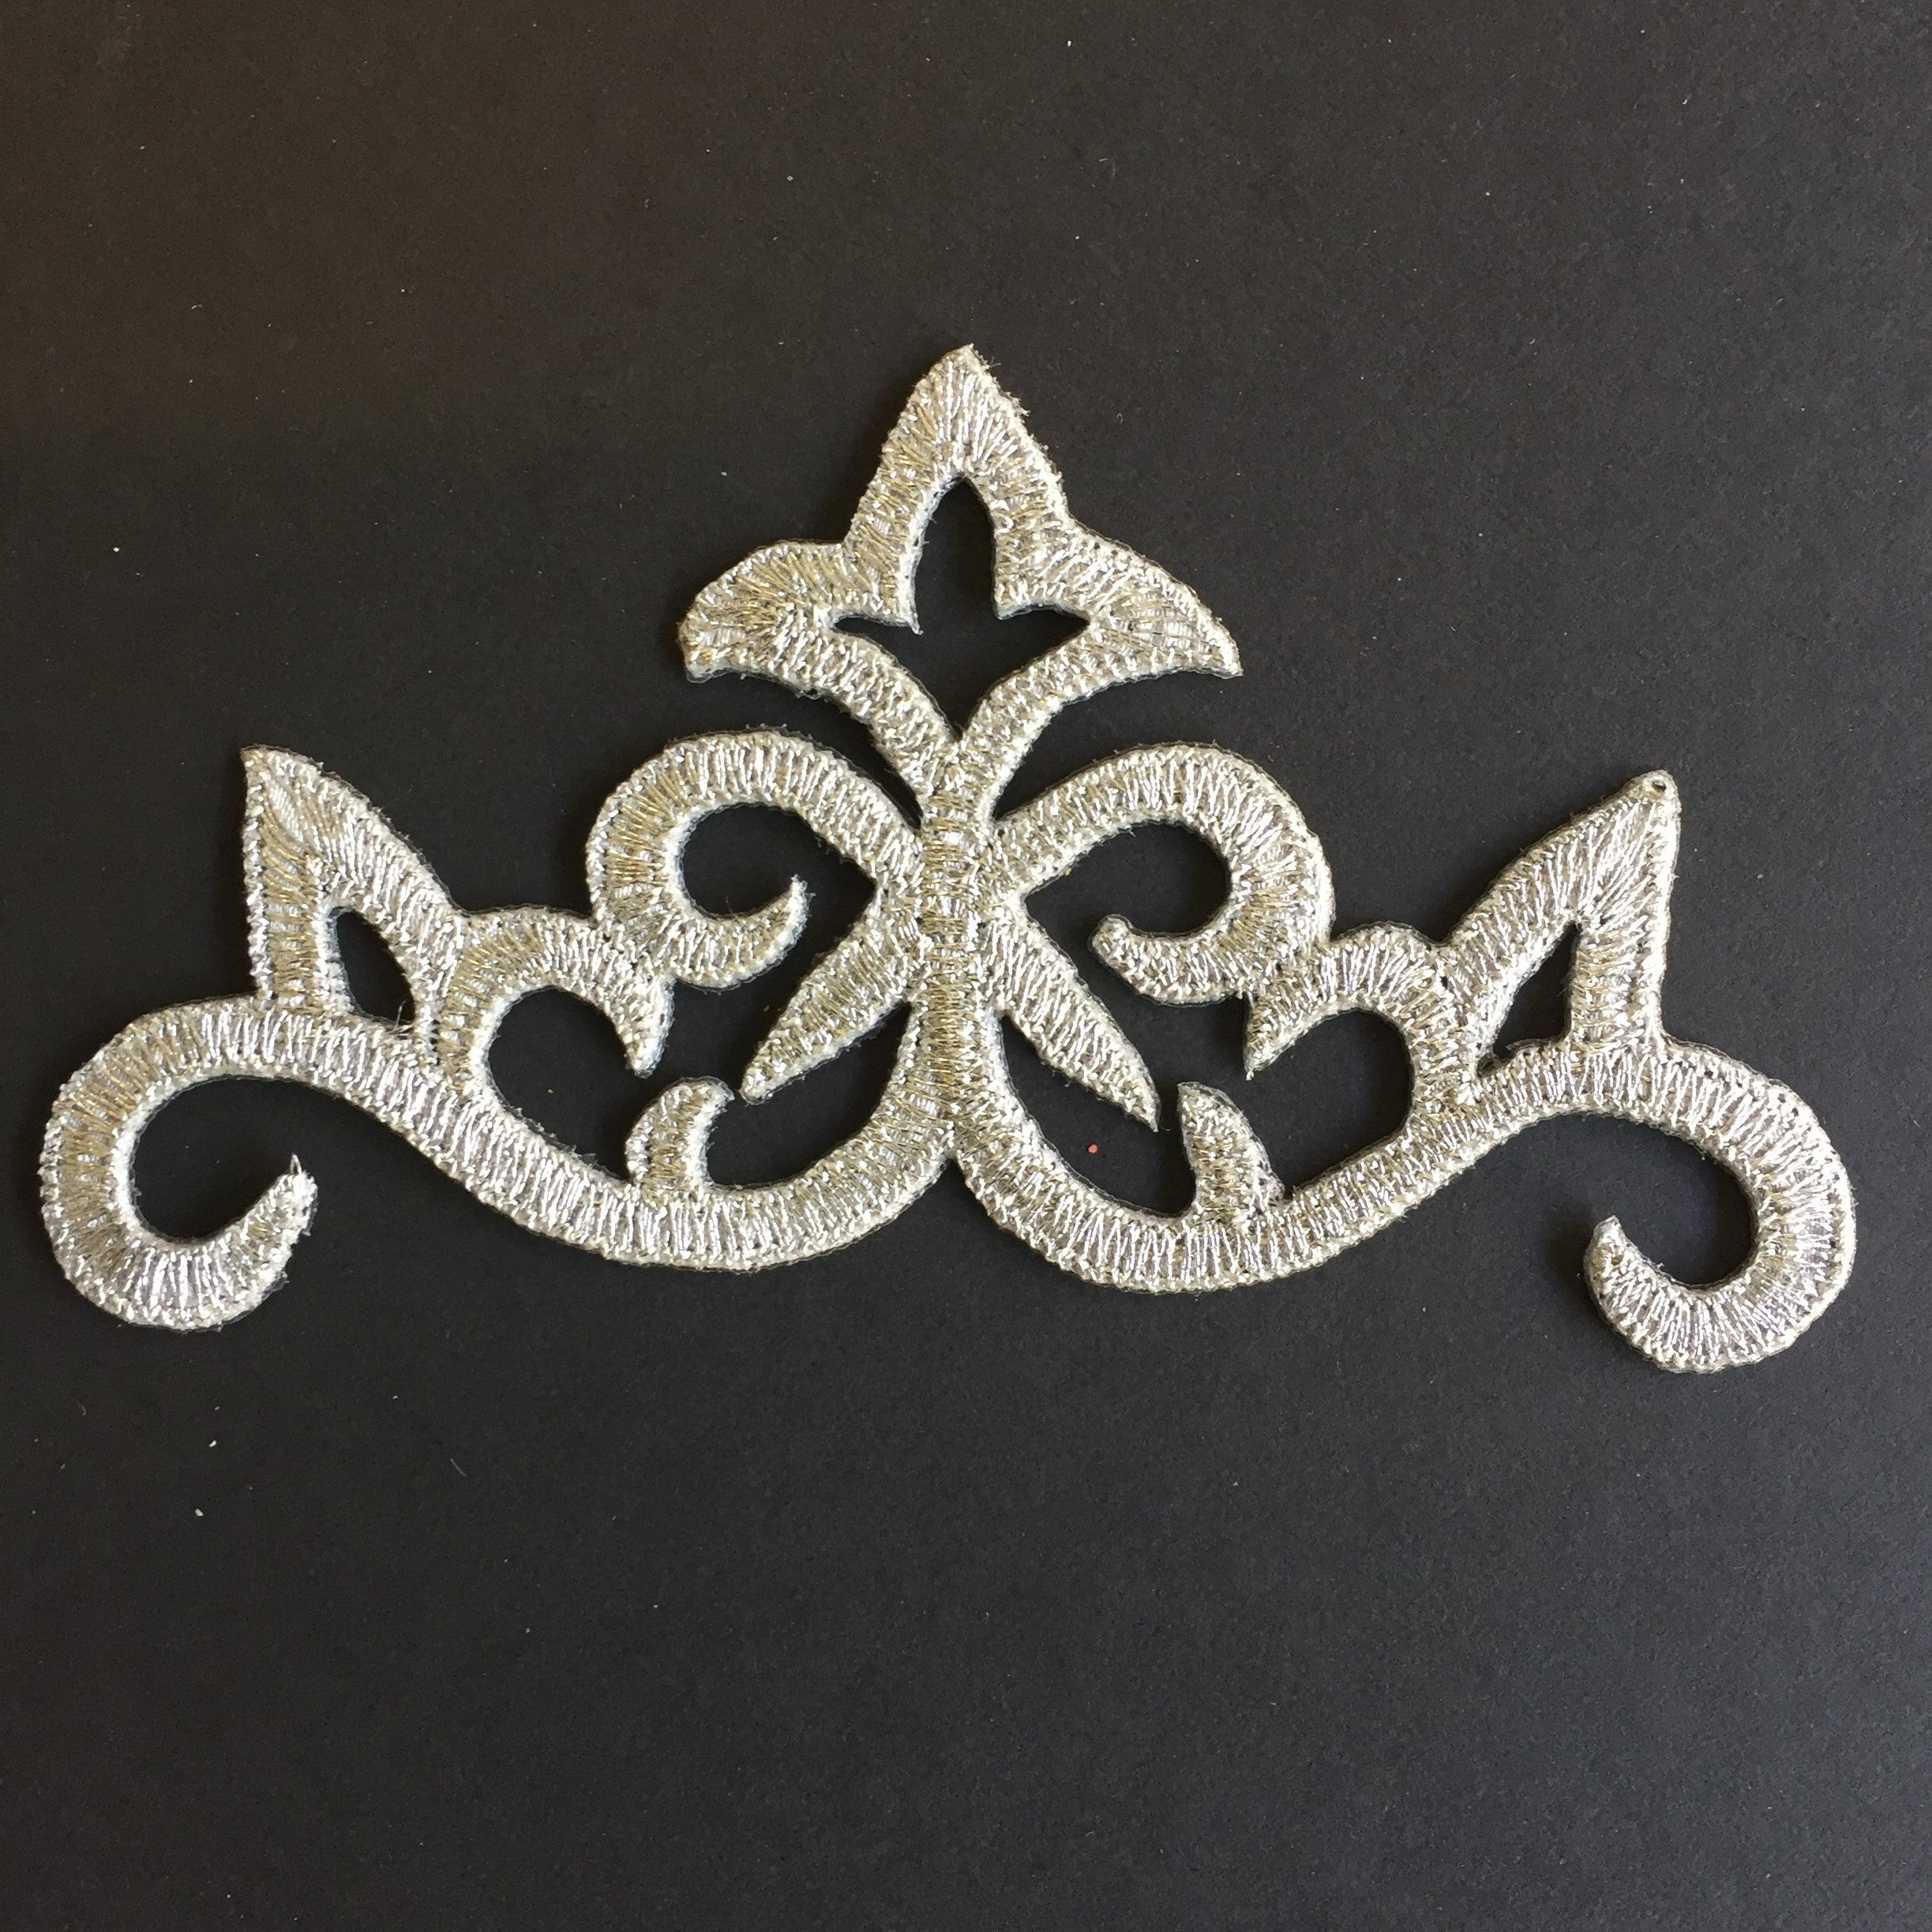 Baroque style metallic silver iron on applique suitable for decorating, dance, stage and cosplay costumes